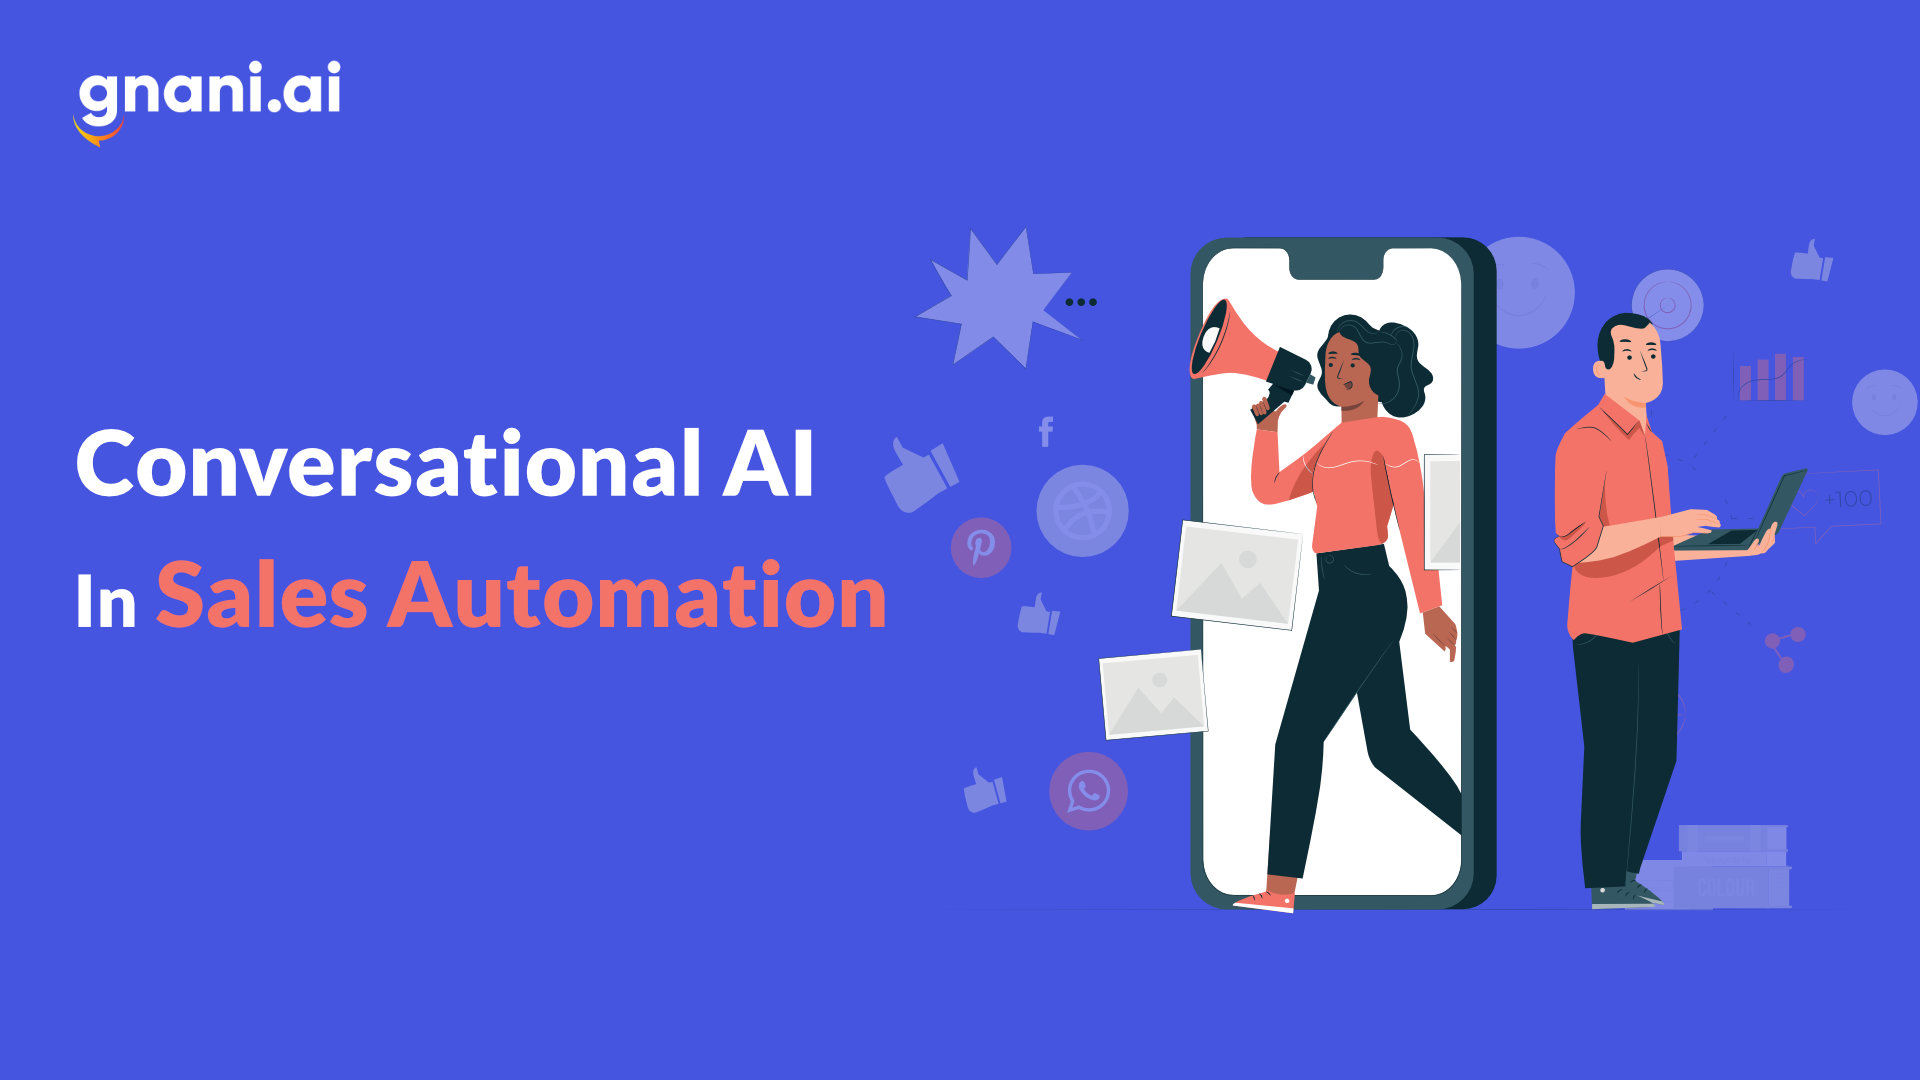 conversational AI in sales automation